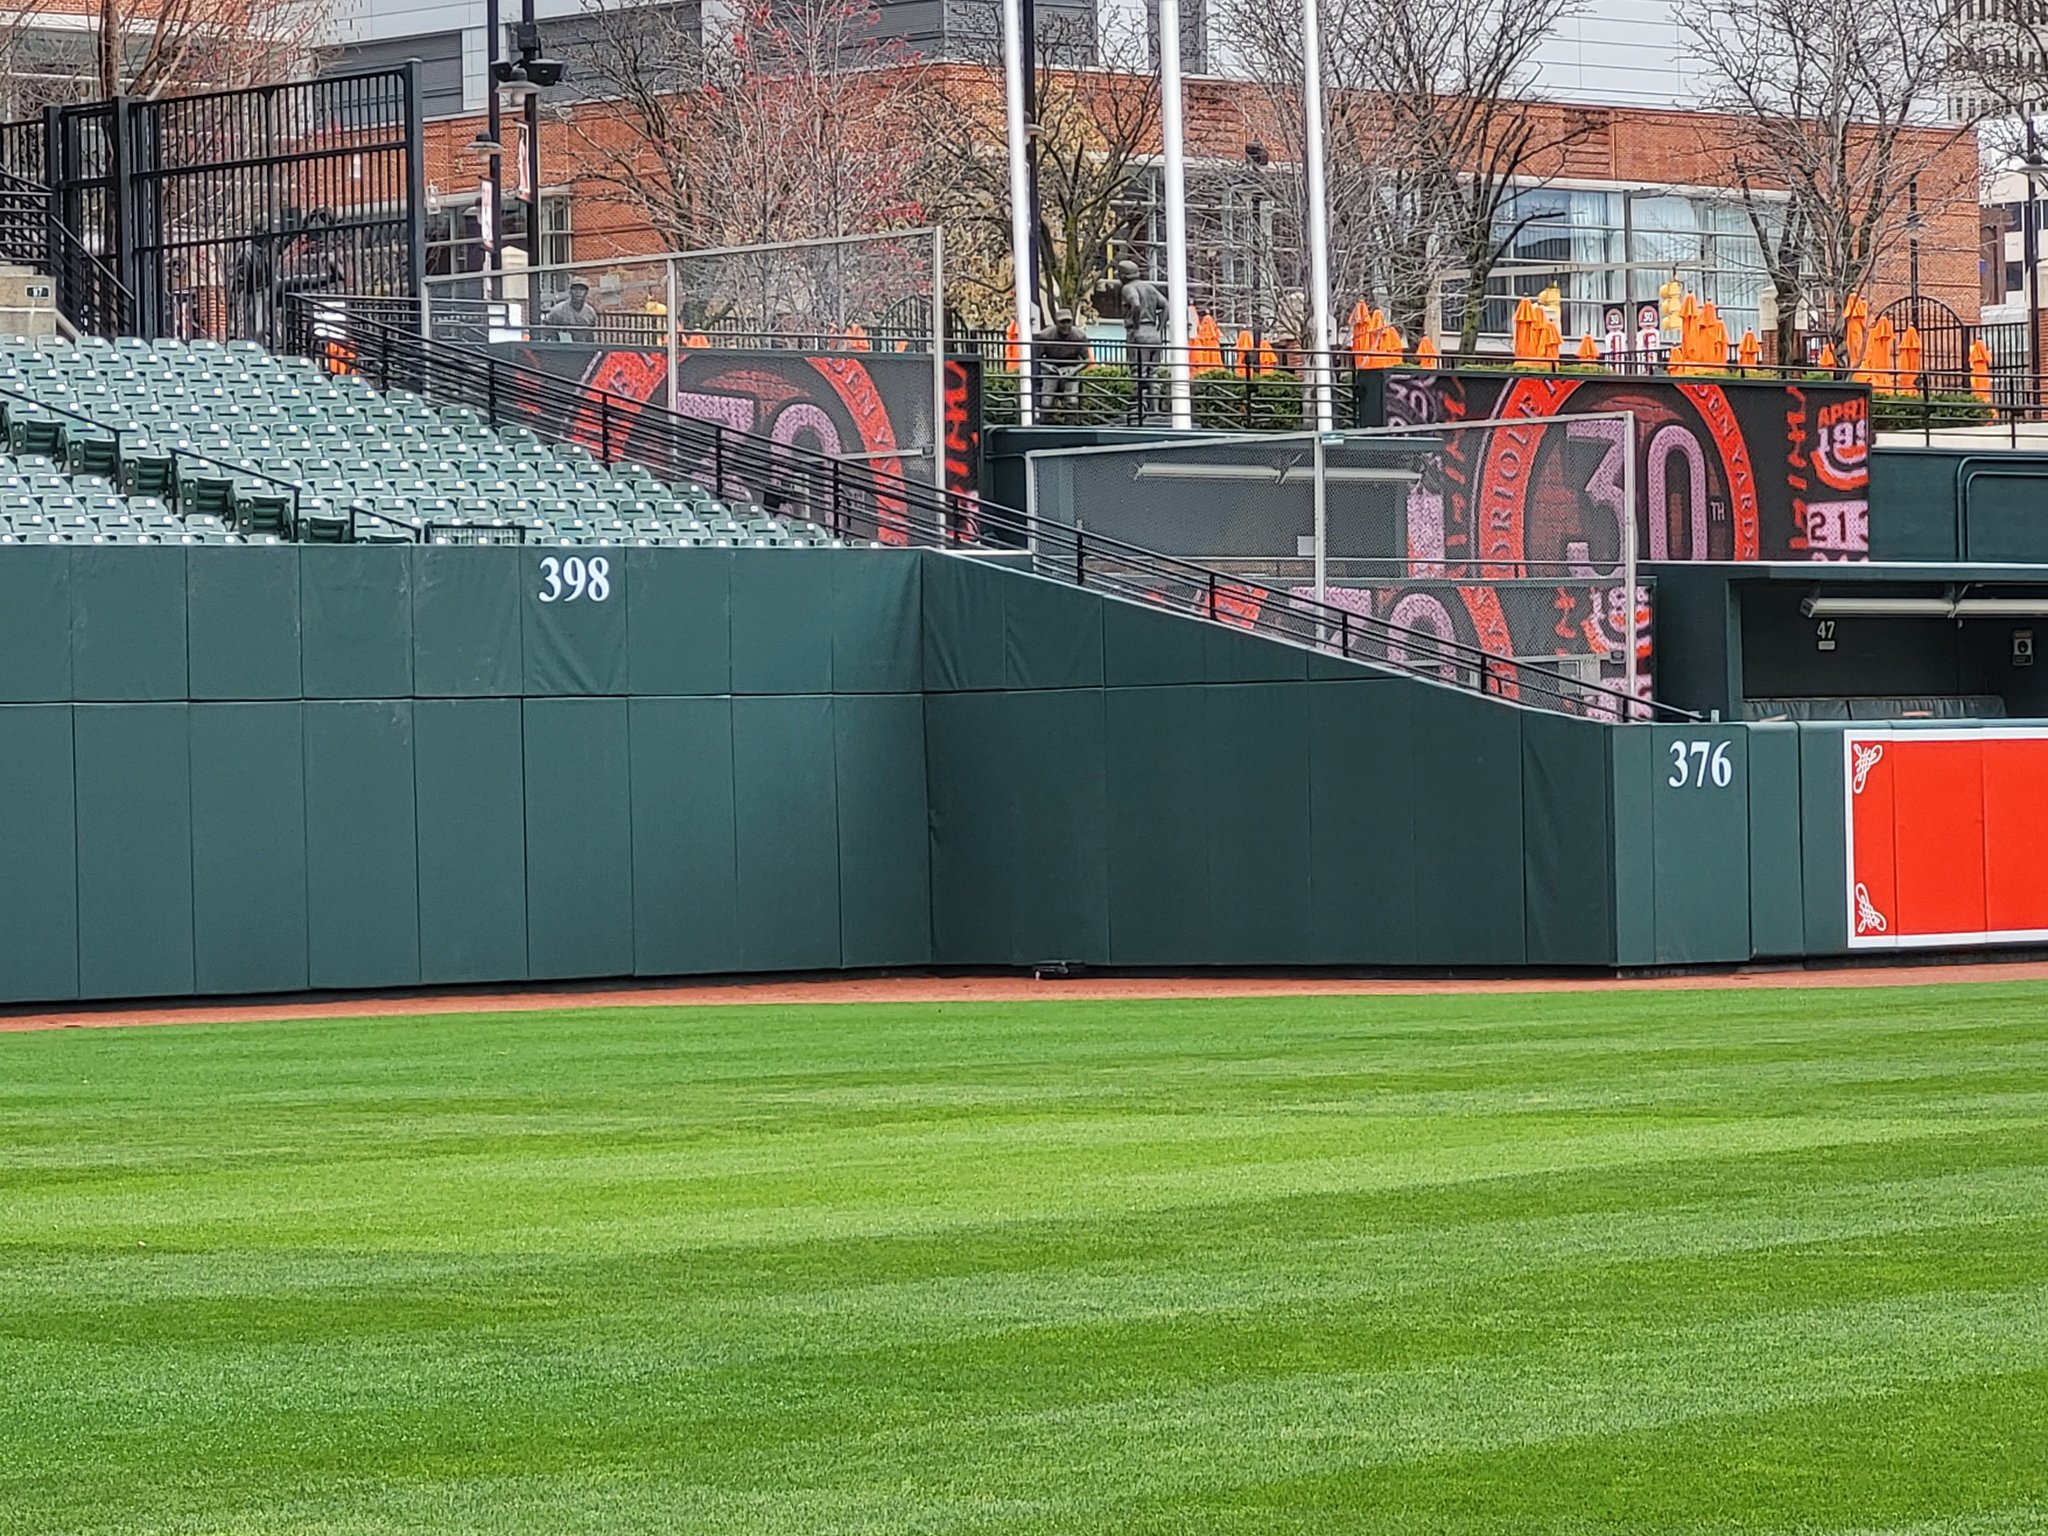 What's new at Oriole Park in 2022 - Blog